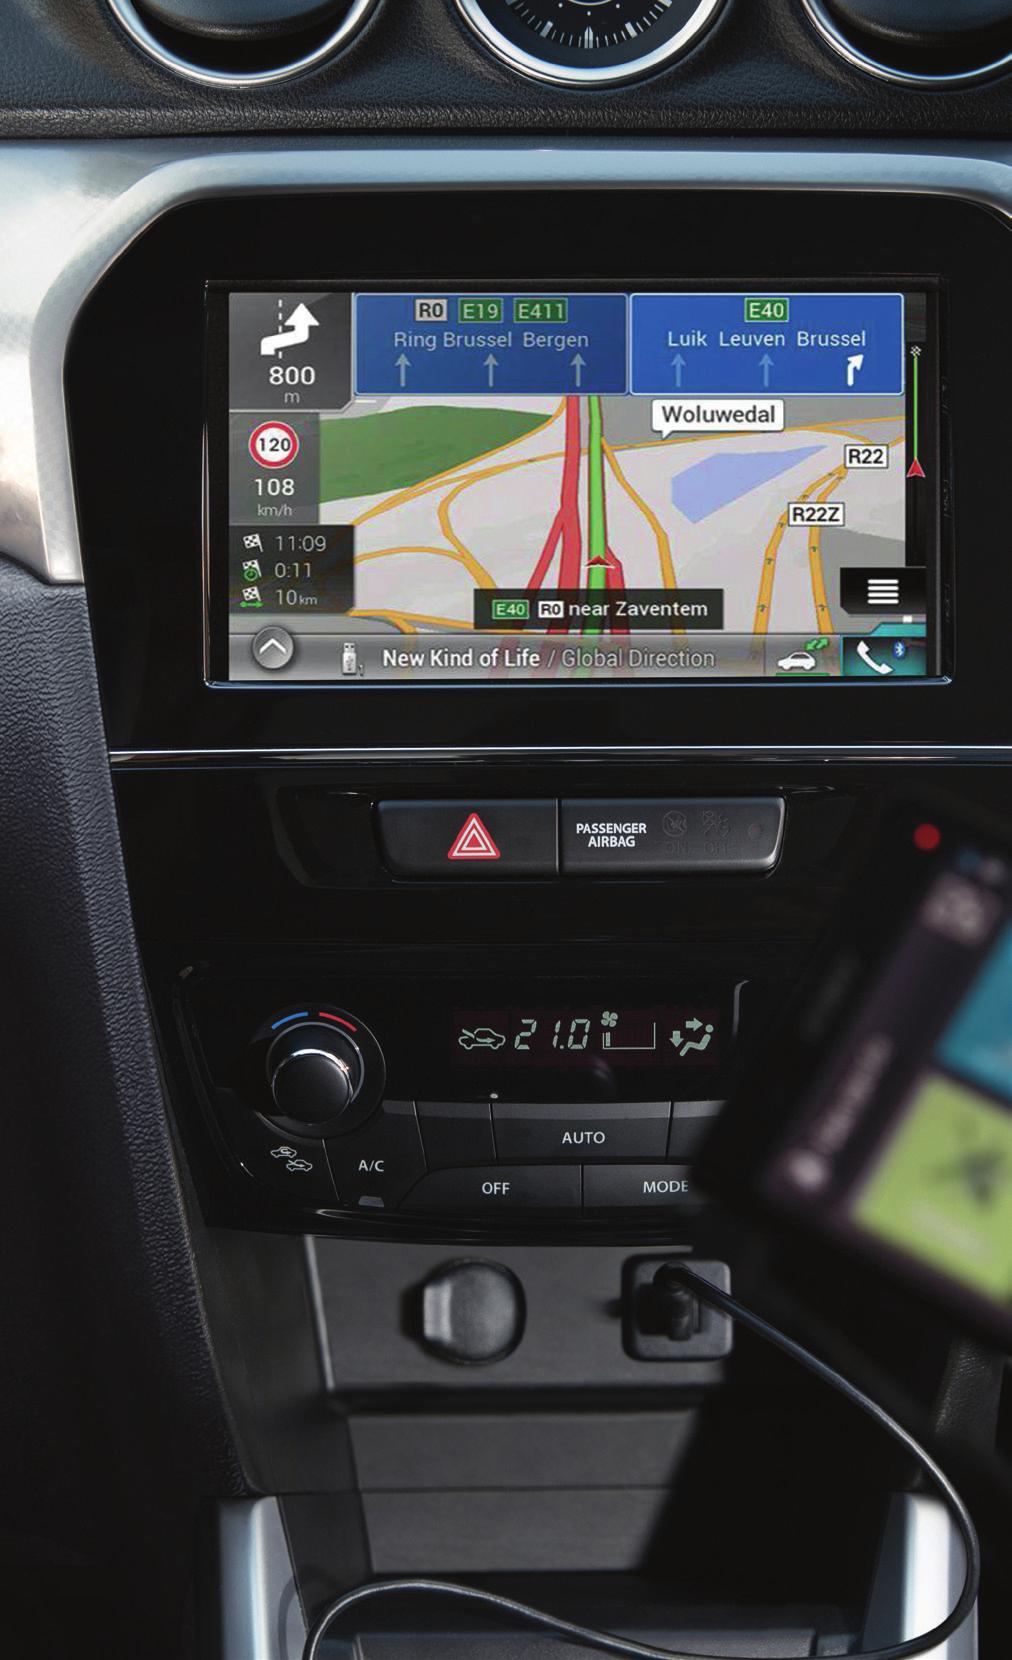 AUDIO & NAVIGATION The Vitara has some of the most advanced in-car technology on the road.